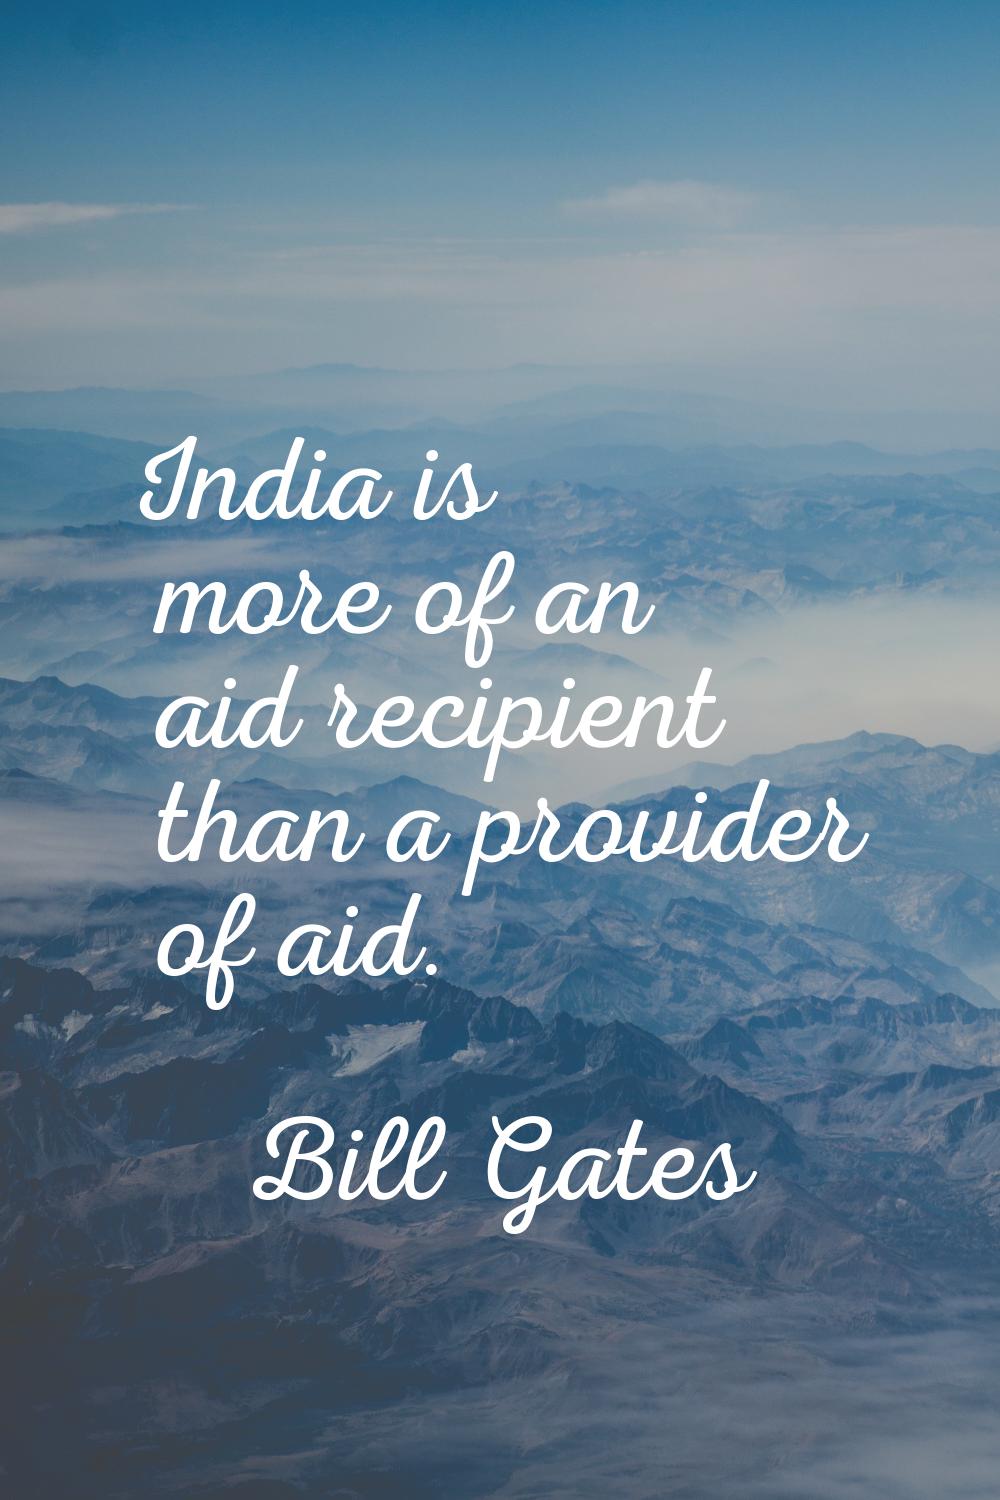 India is more of an aid recipient than a provider of aid.